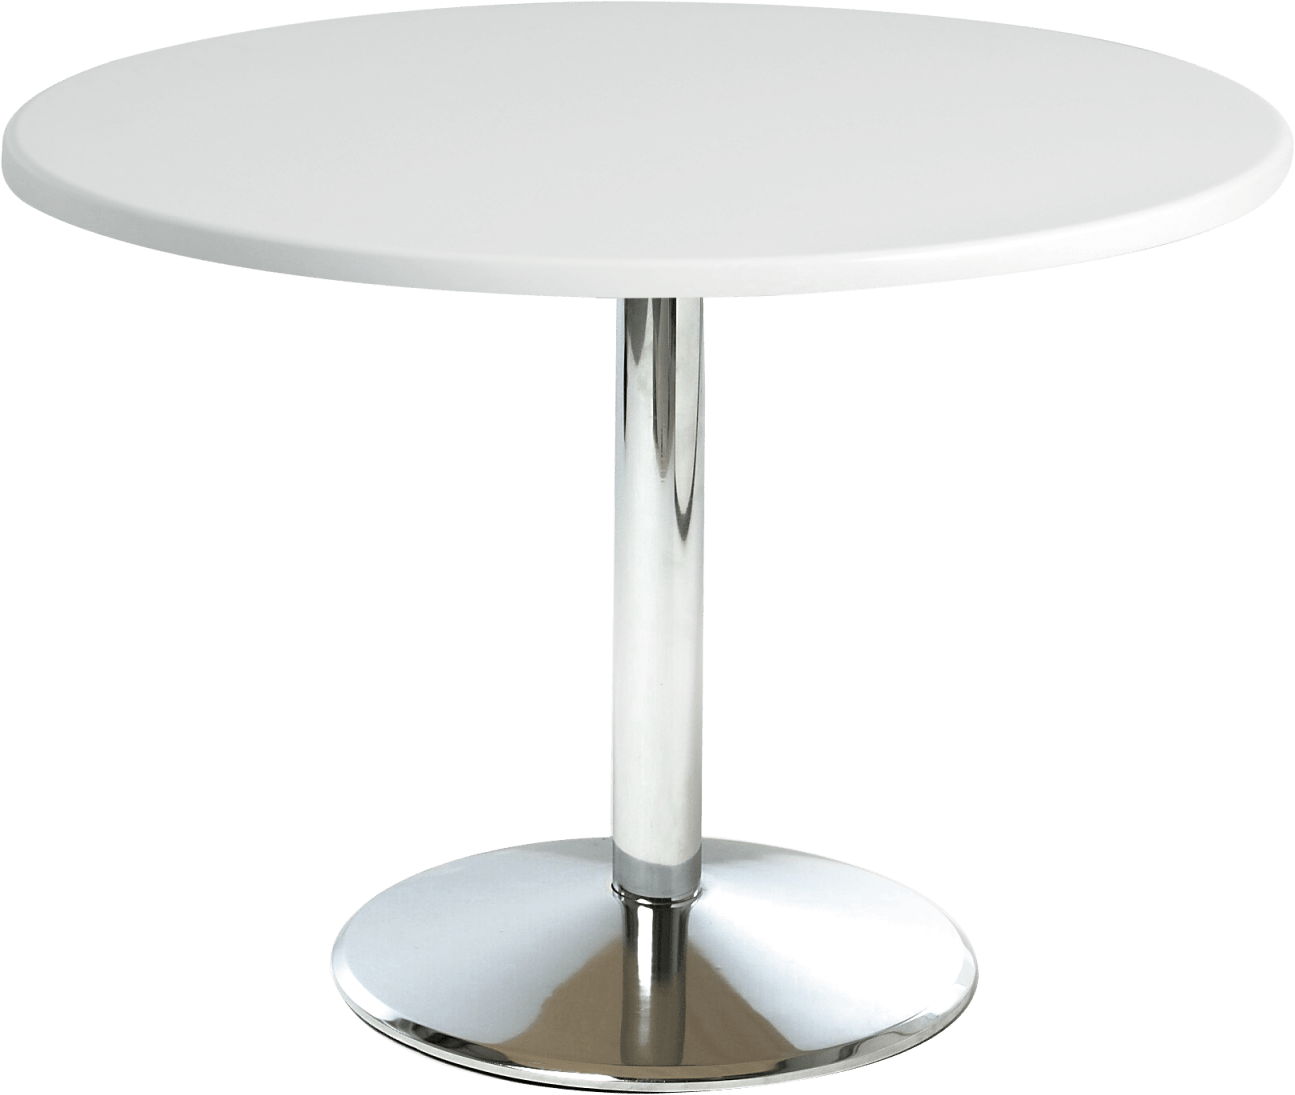 Milan Chrome Big Base Conference Table Hire for Events